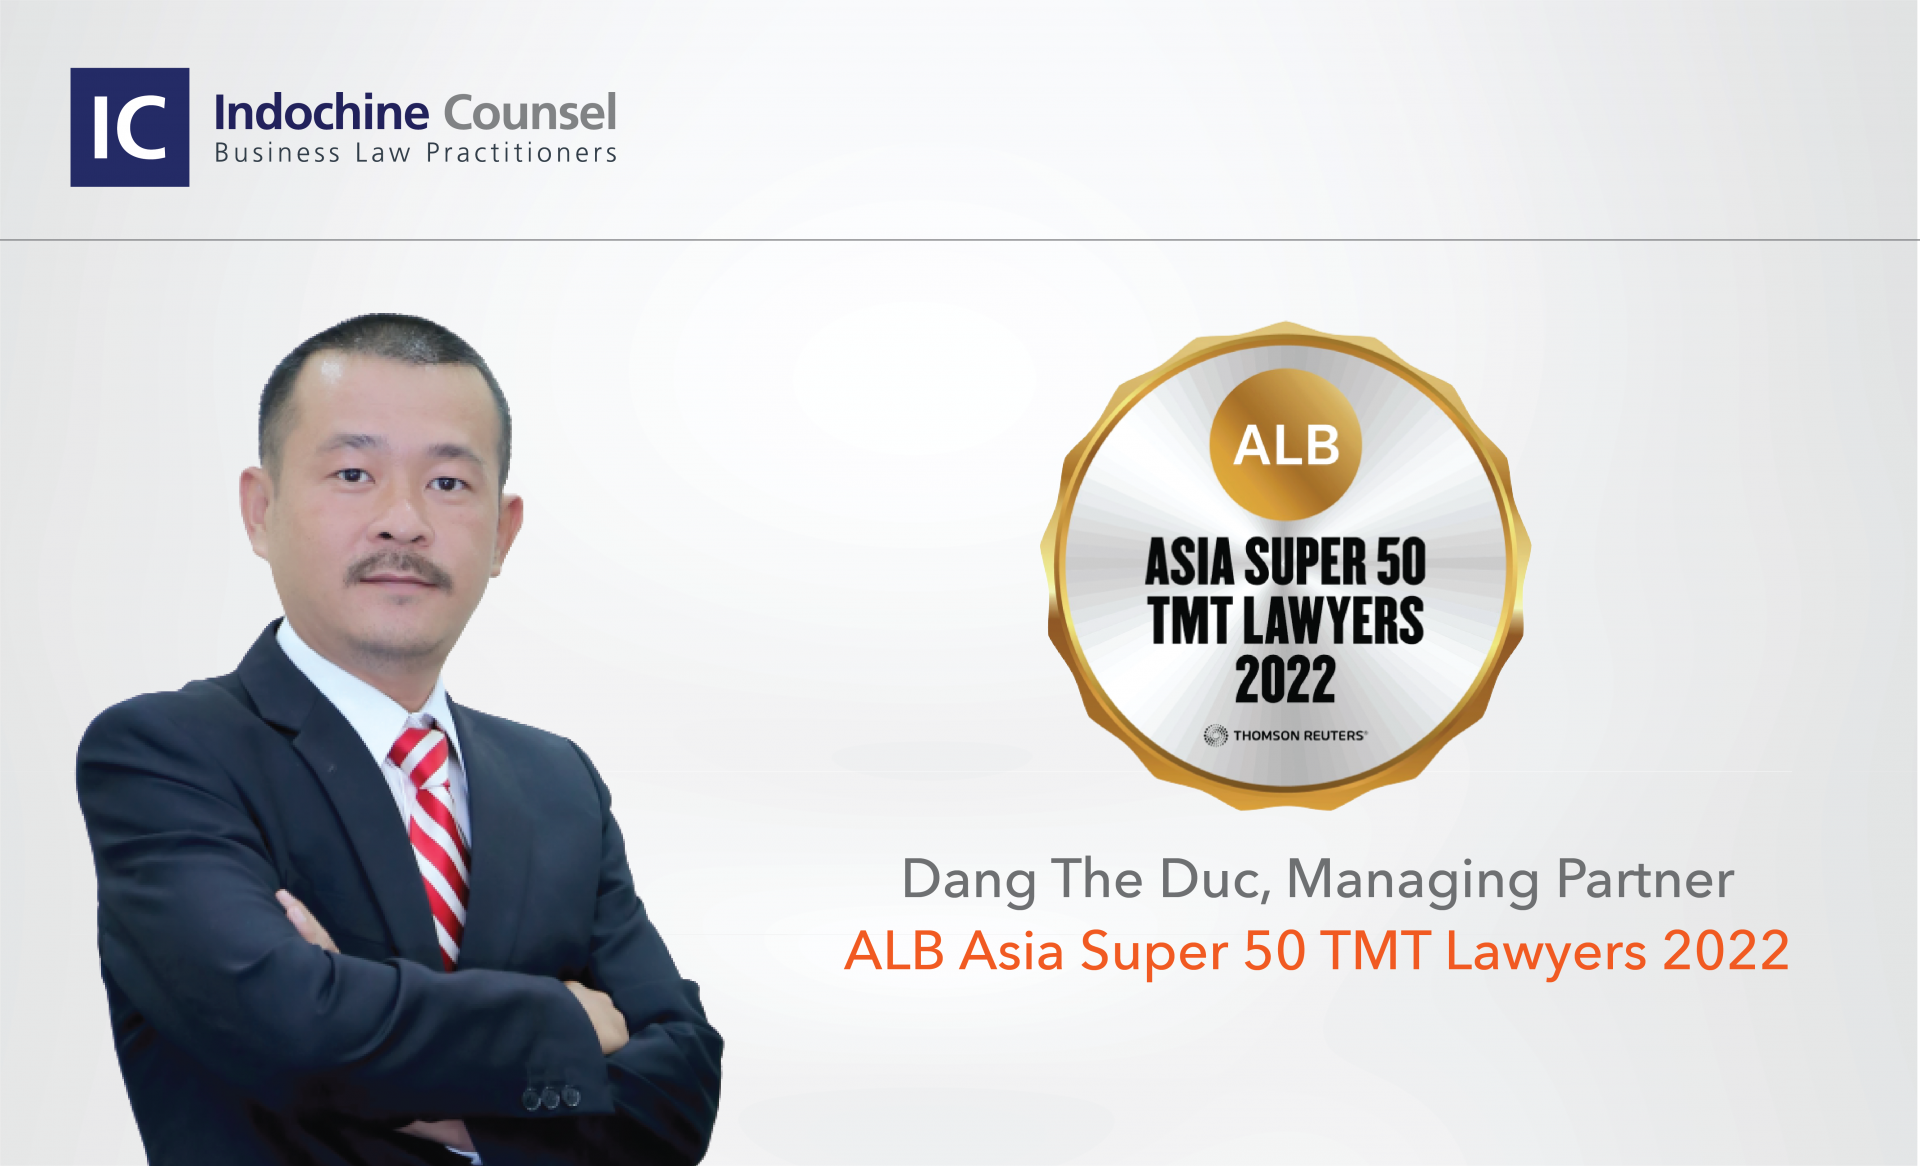 Indochine Counsel's managing partner among ALB Asia Super 50 TMT Lawyers 2022